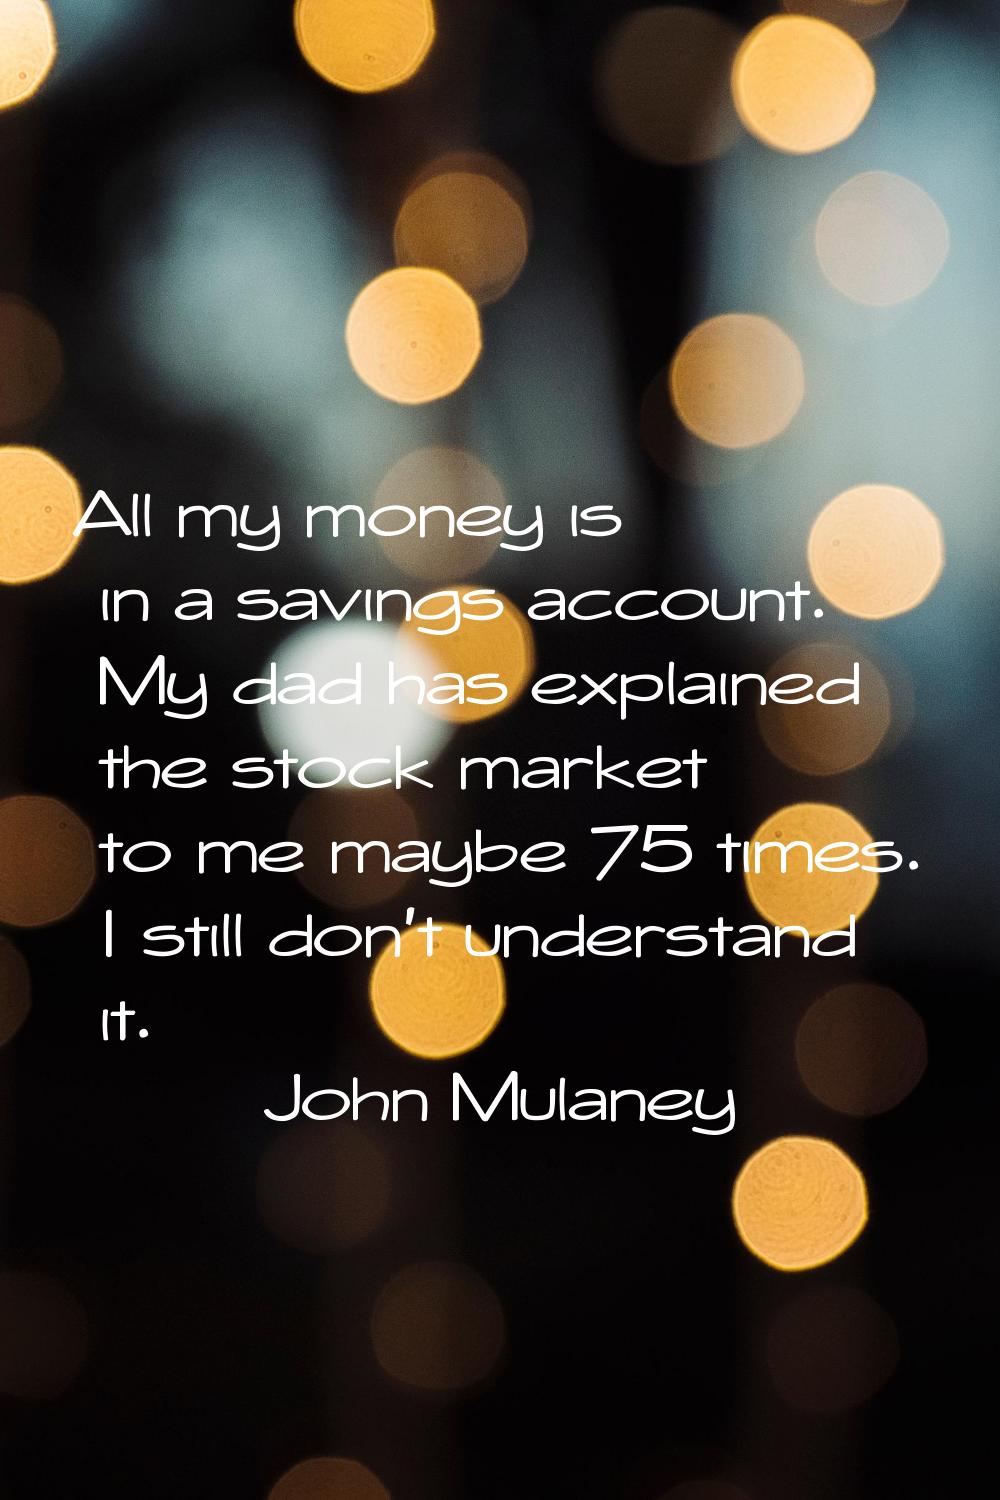 All my money is in a savings account. My dad has explained the stock market to me maybe 75 times. I